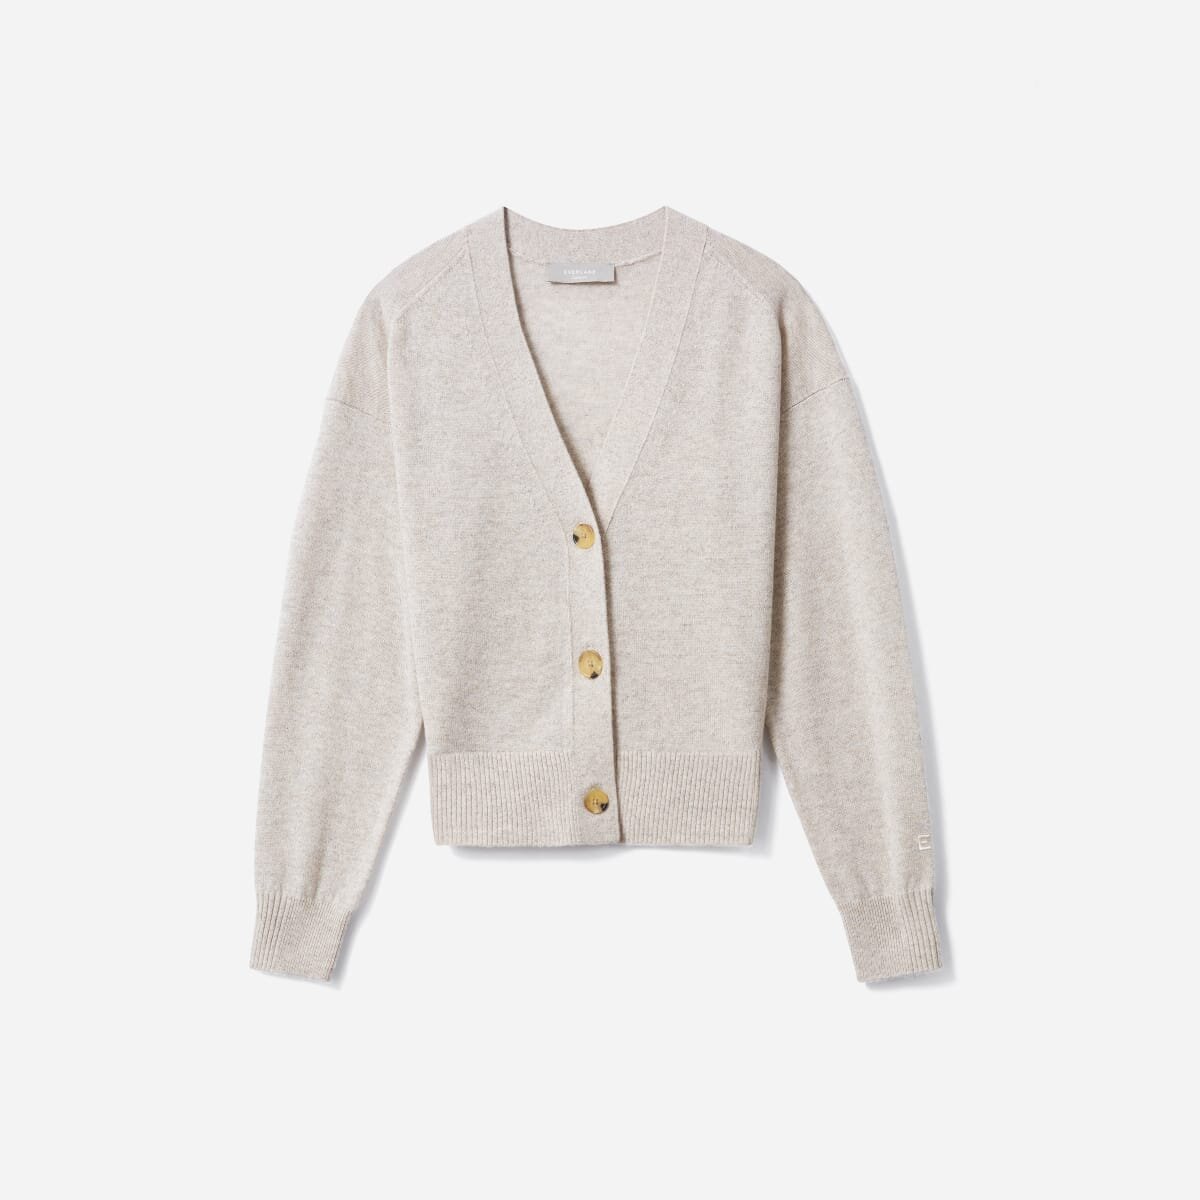 $145 | Cropped Cashmere Cardigan